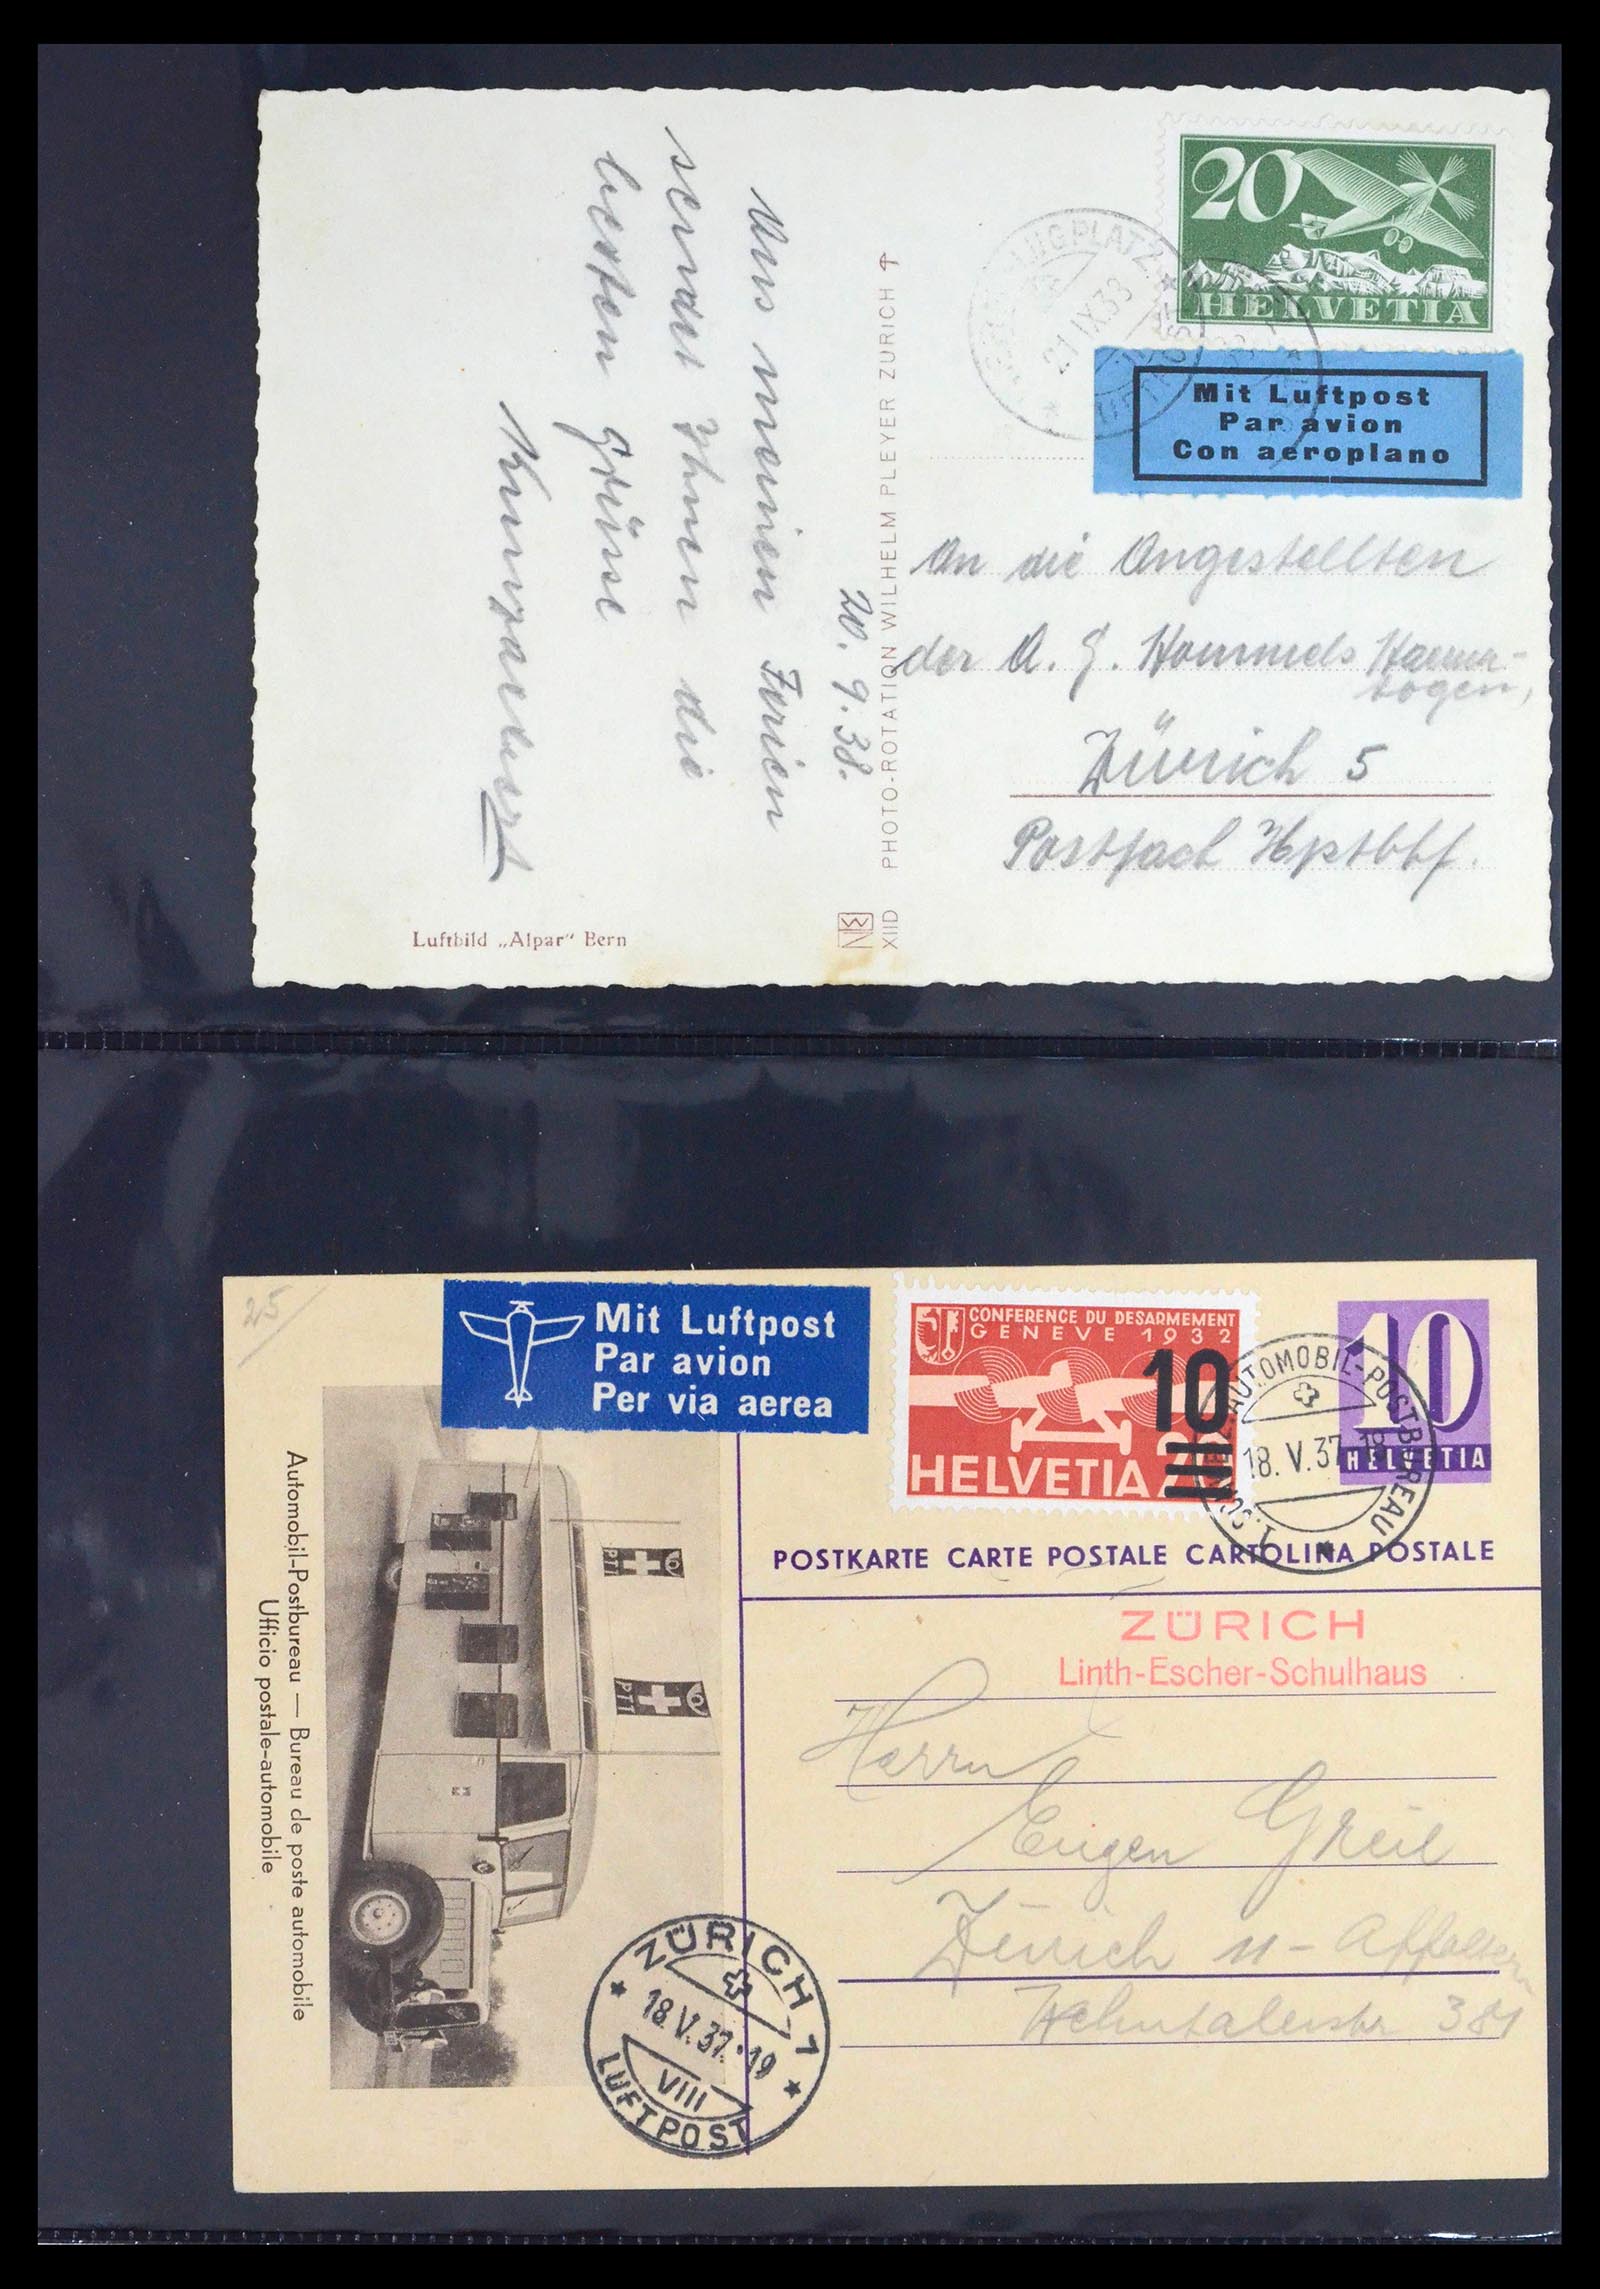 39533 0001 - Stamp collection 39533 Zwitserland airmail covers 1925-1960.